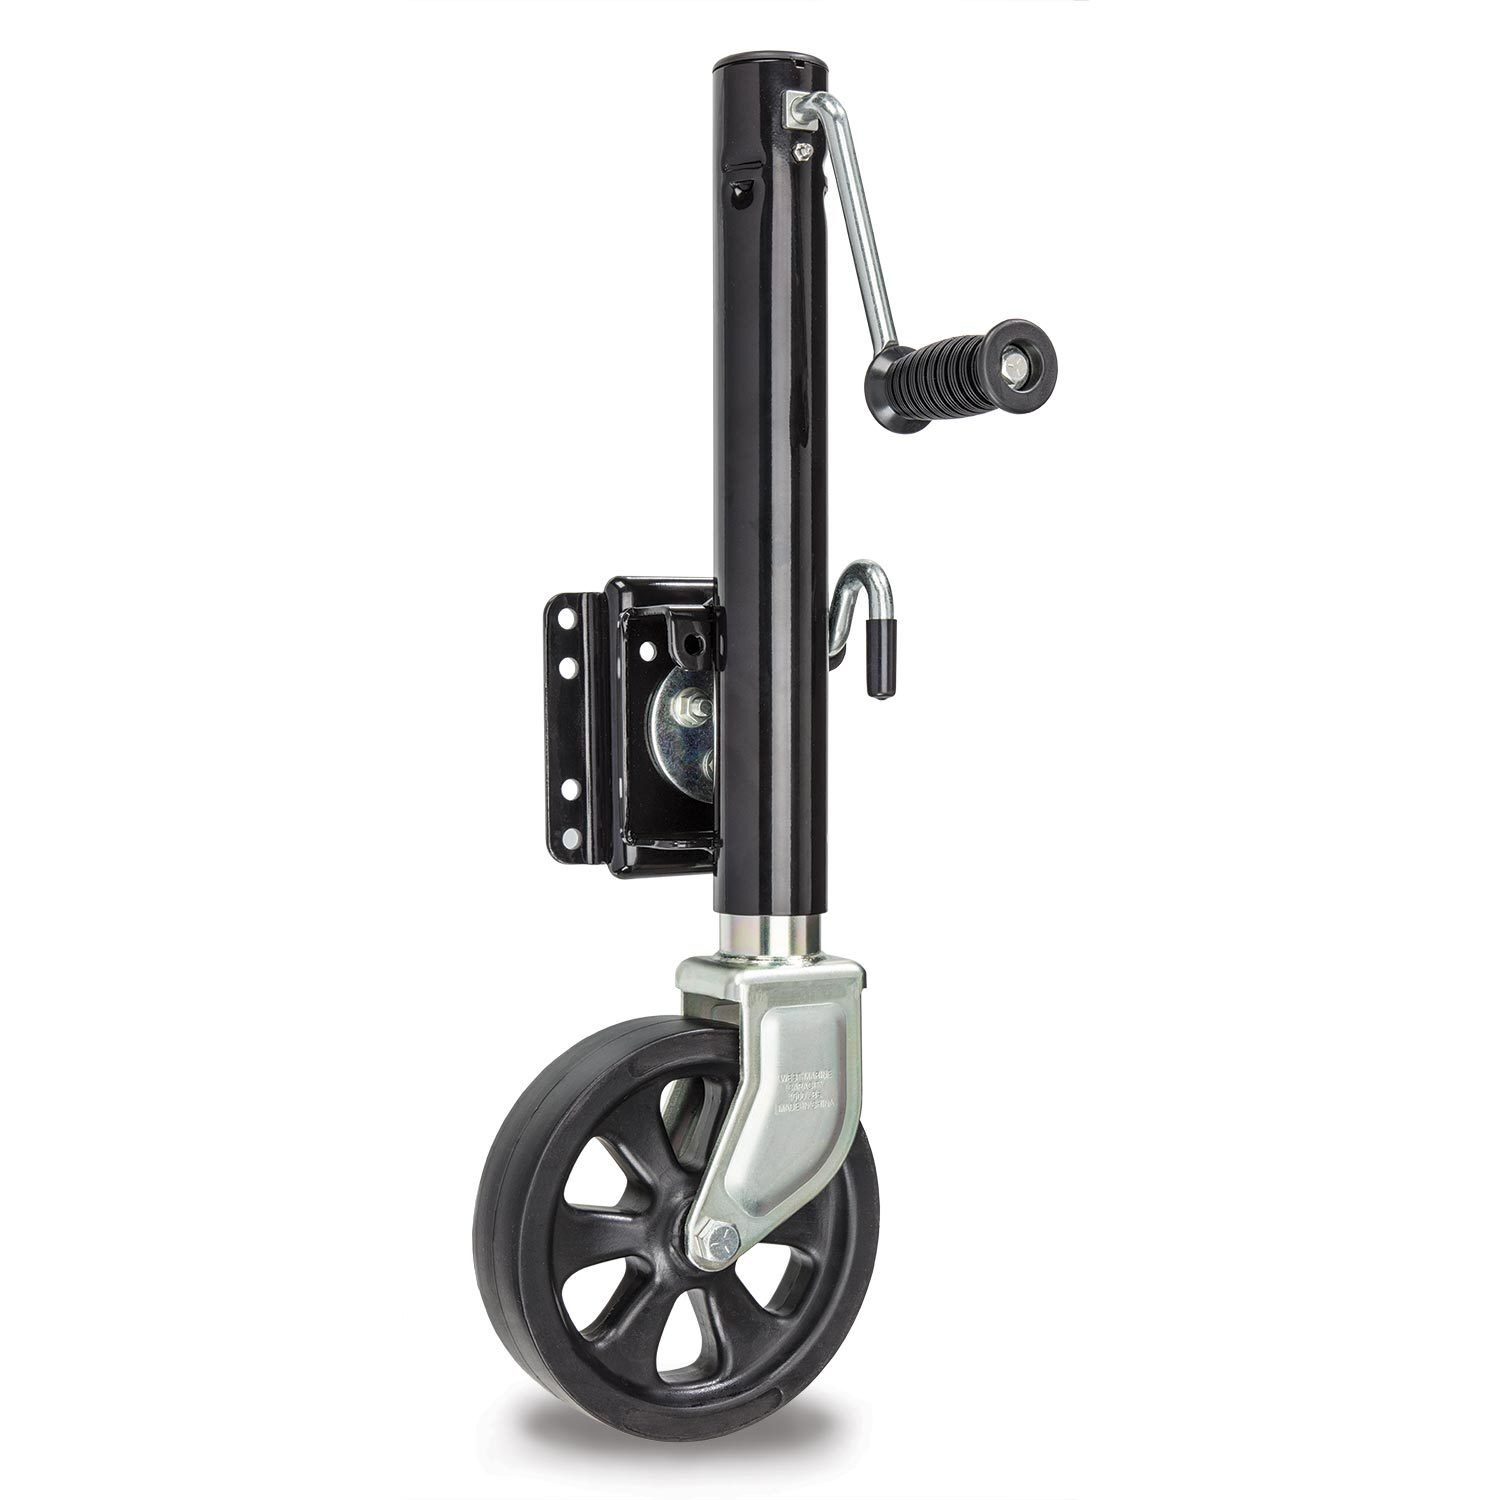 1000lbs Marine Trailer Jack with Wheel FANTASK Side Swivel Jack Side Swivel and Trailer Jack Bolt-On Side-Swivel Jack Movable for Lifting Swing-Up Trailer Jack with Wheel Marine Swivel Jack 